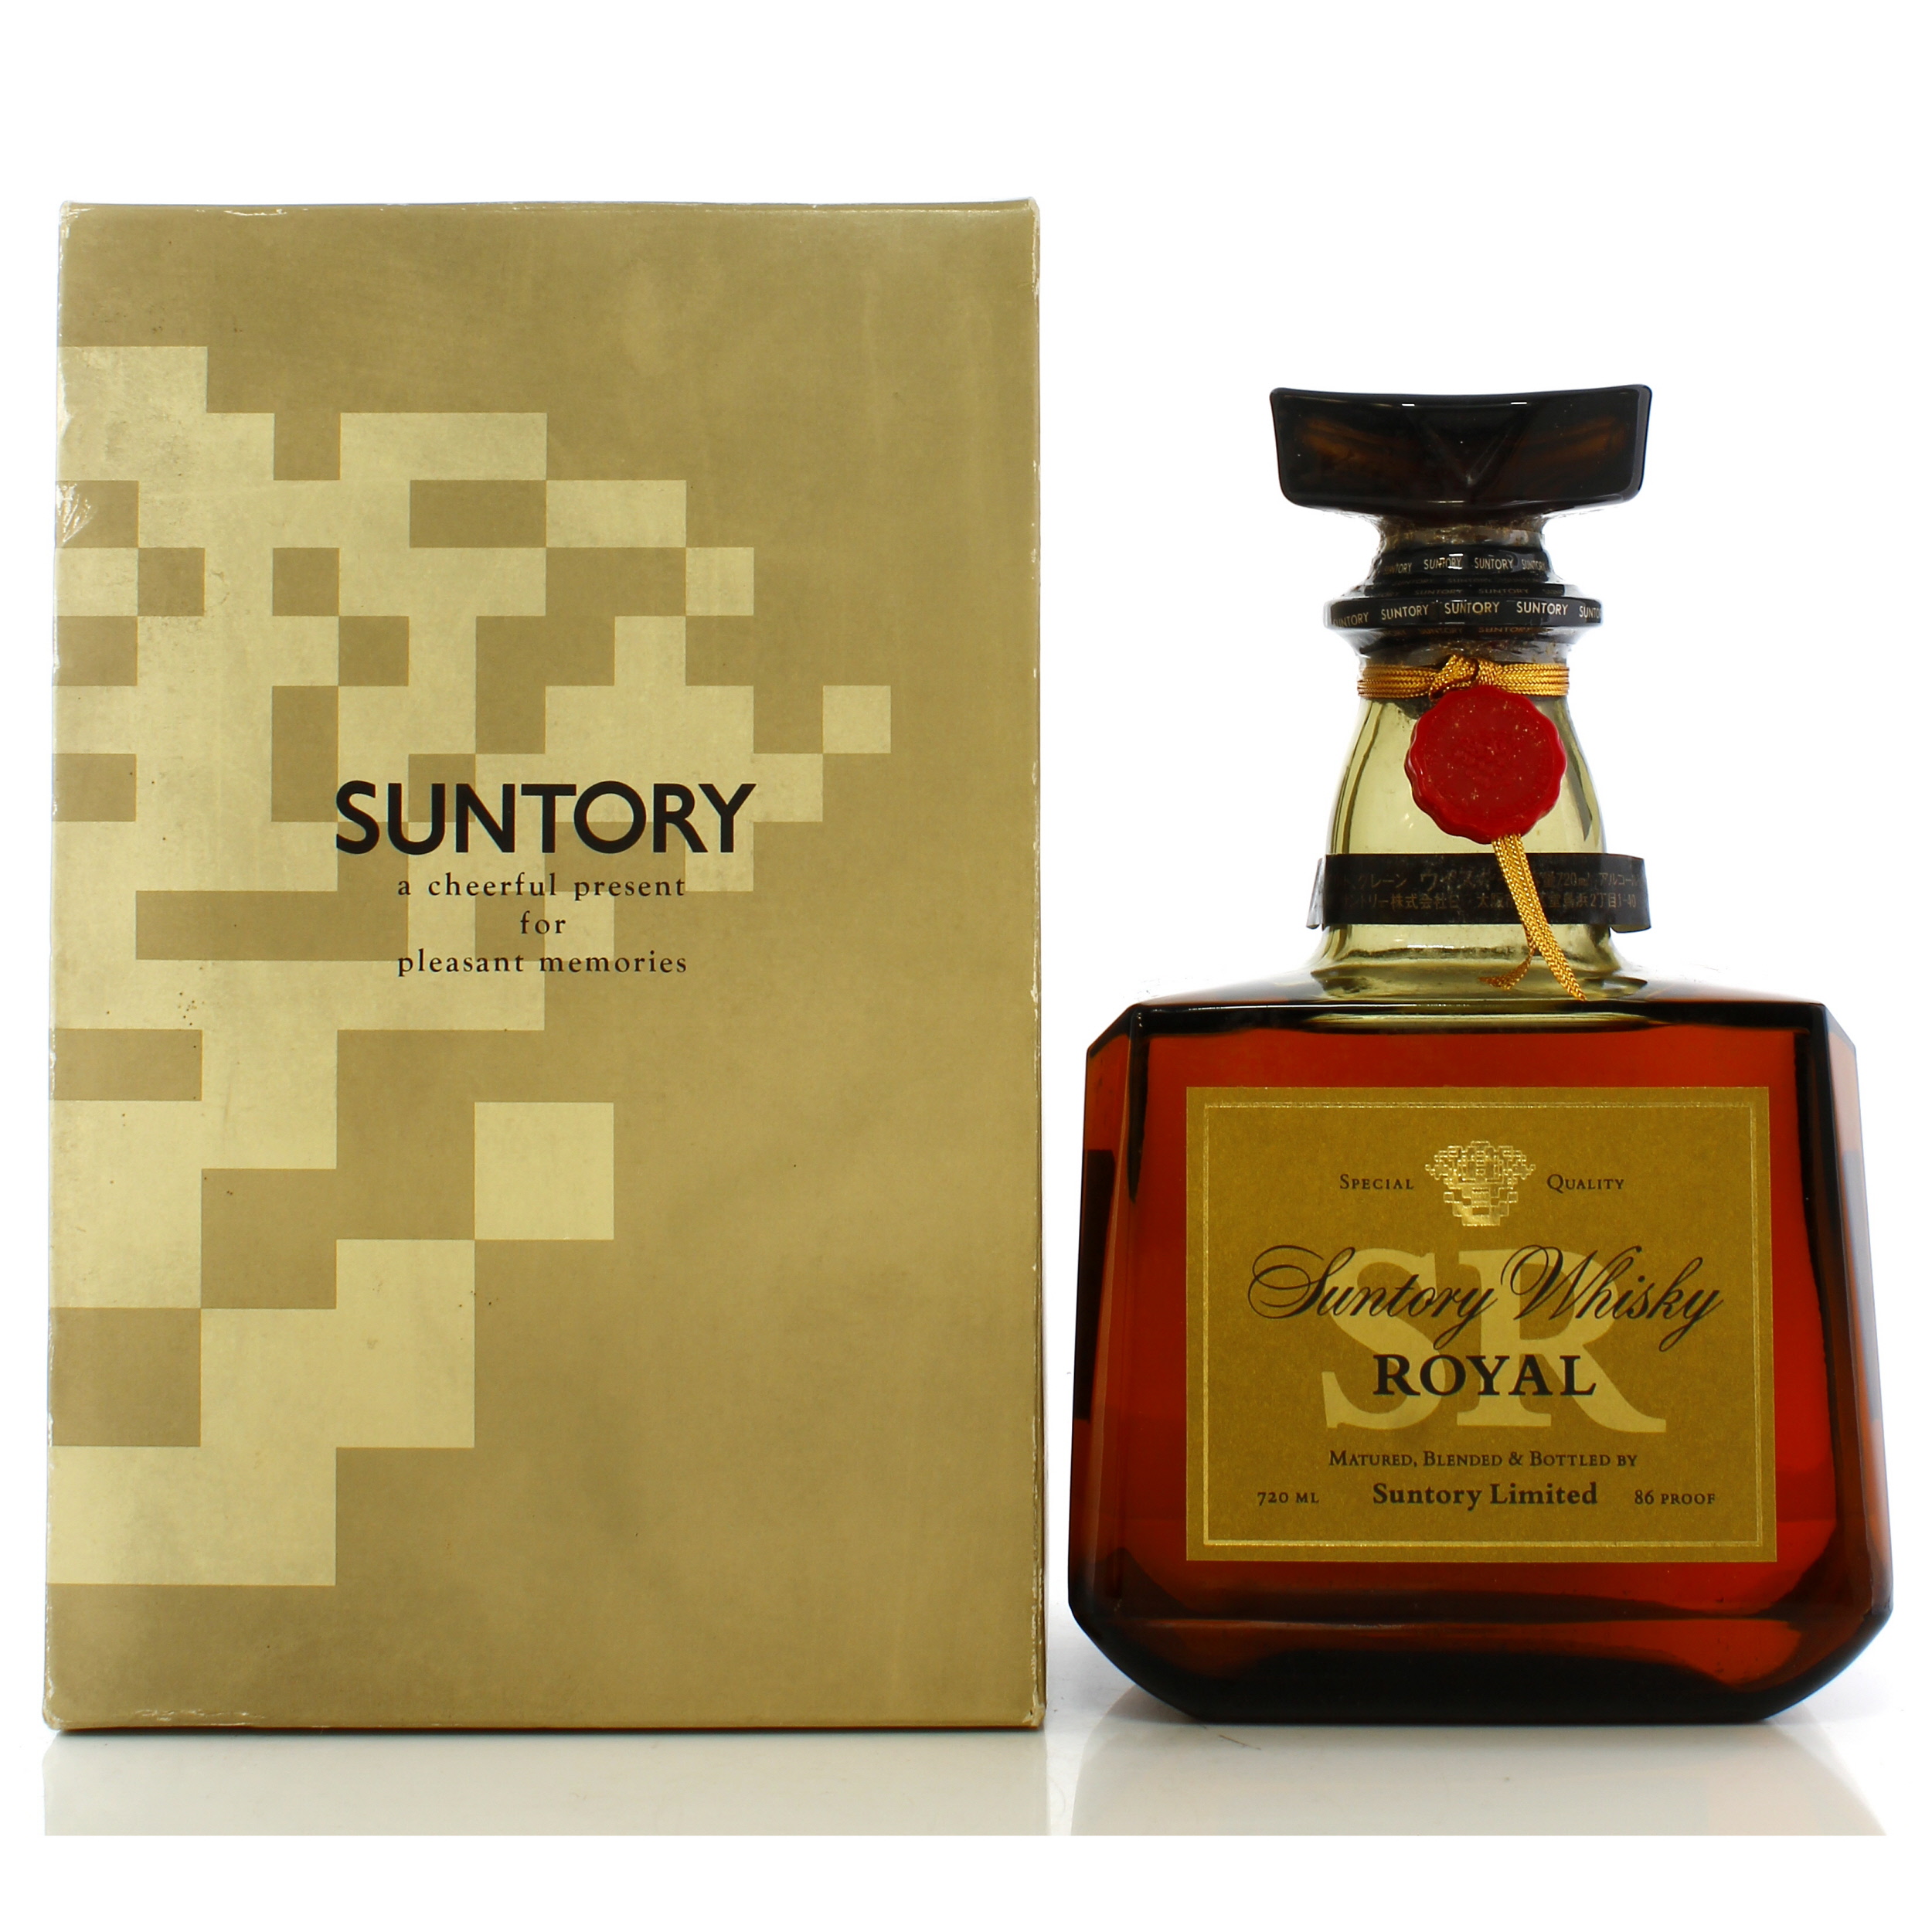 Suntory Whisky ROYAL SR LIMITED 購入品につきお値下げ